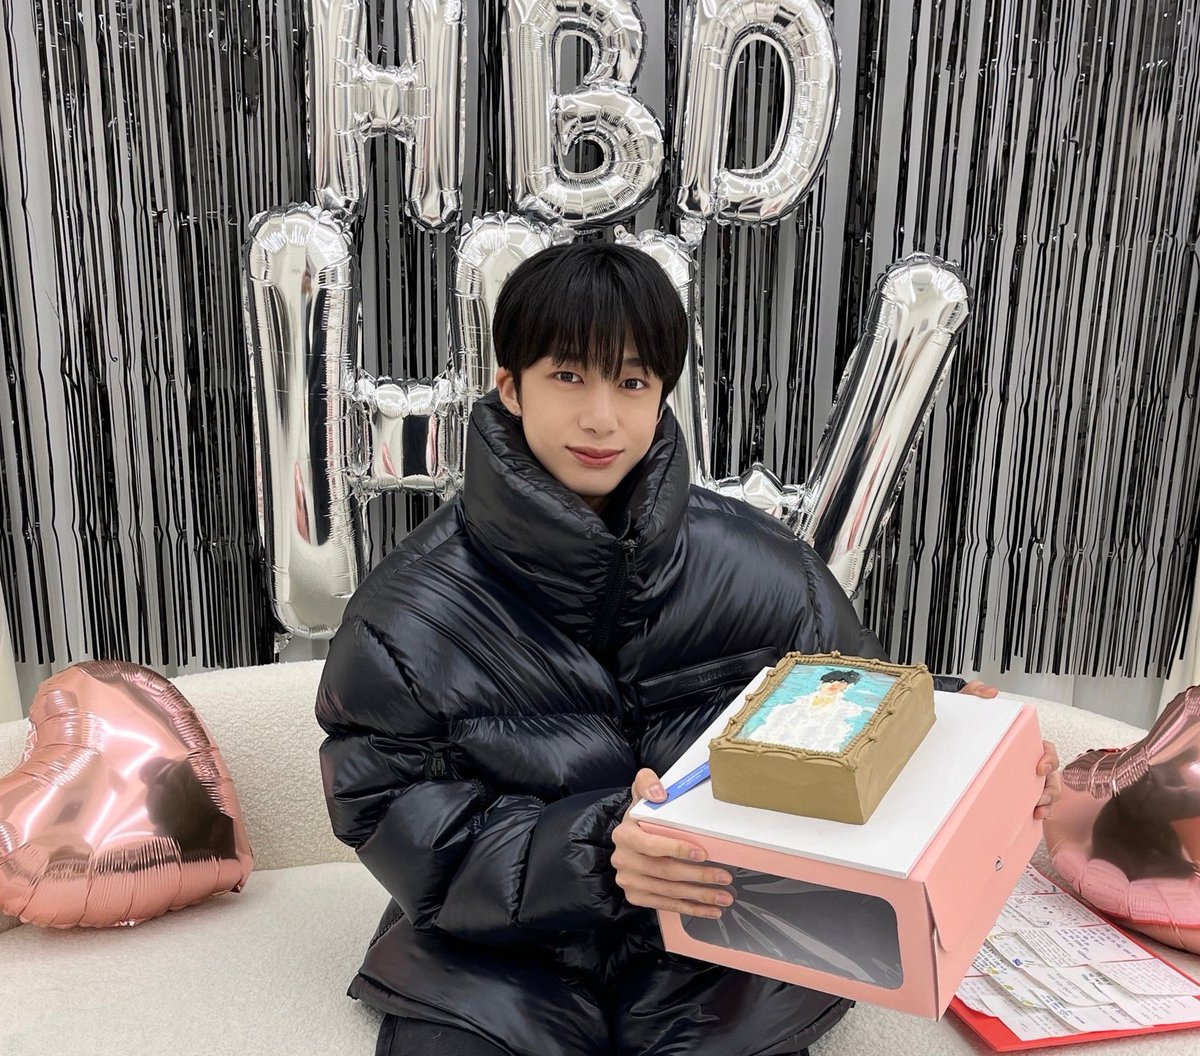 happy 30th birthday to our chae hyungwonnie 🤍 the man who’s an amazing singer, dancer, actor, producer, writer, model and so much more. 

monbebes love and miss u sm, thank u for being the best artist and idol we could’ve asked for 

#HBDtoHYUNGWON 
 #겨울의따뜻한선물_형원데이